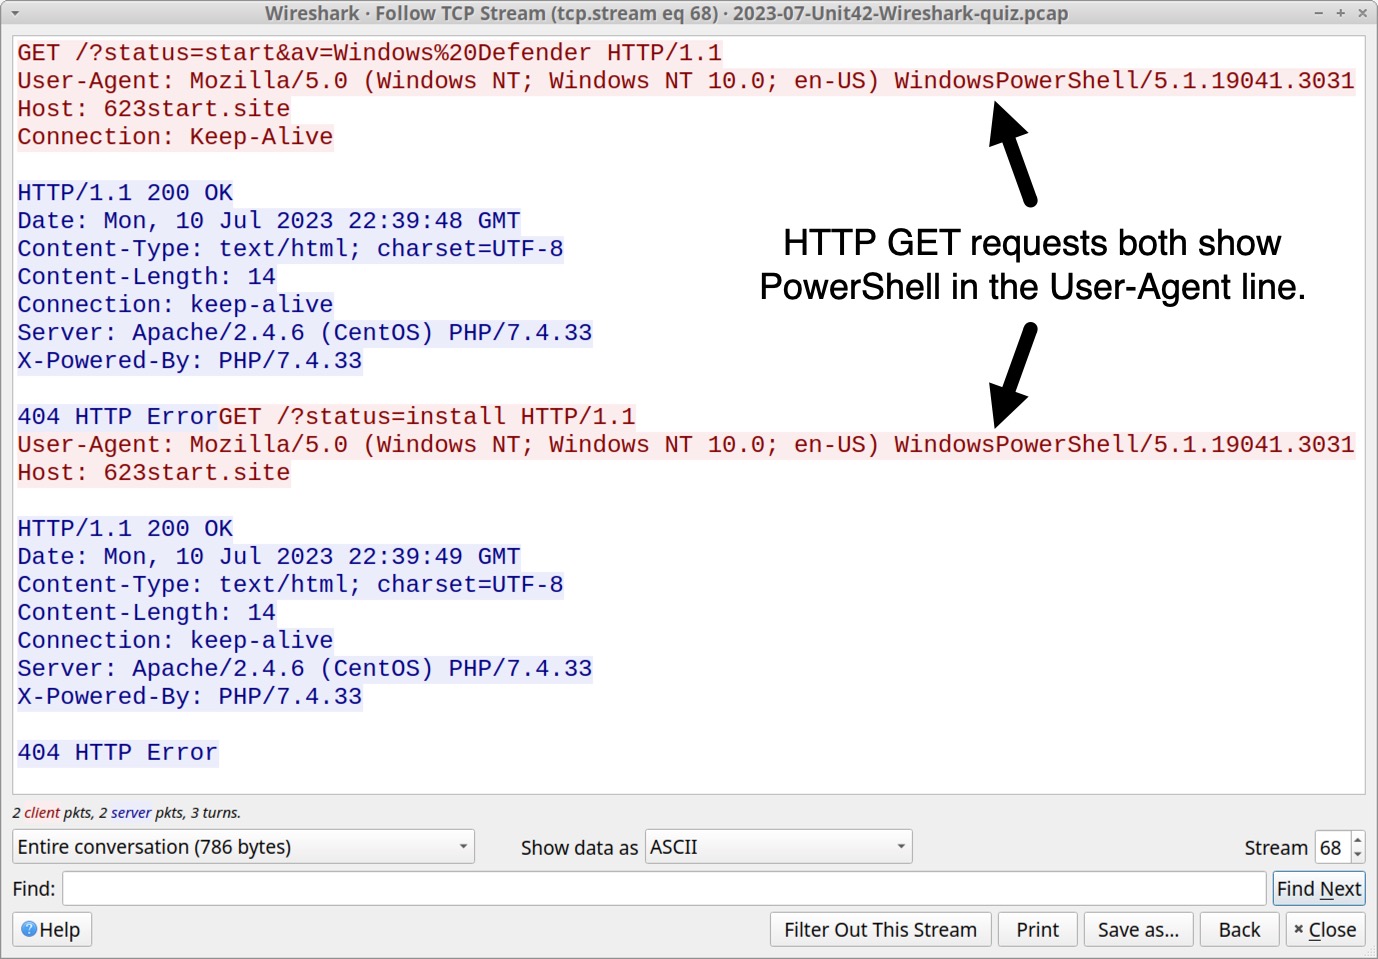 Image 5 is a screenshot of Wireshark’s TCP stream window. Indicated by the black arrows pointing to the red text is the HTTP GET requests that both show PowerShell in the User-Agent line.